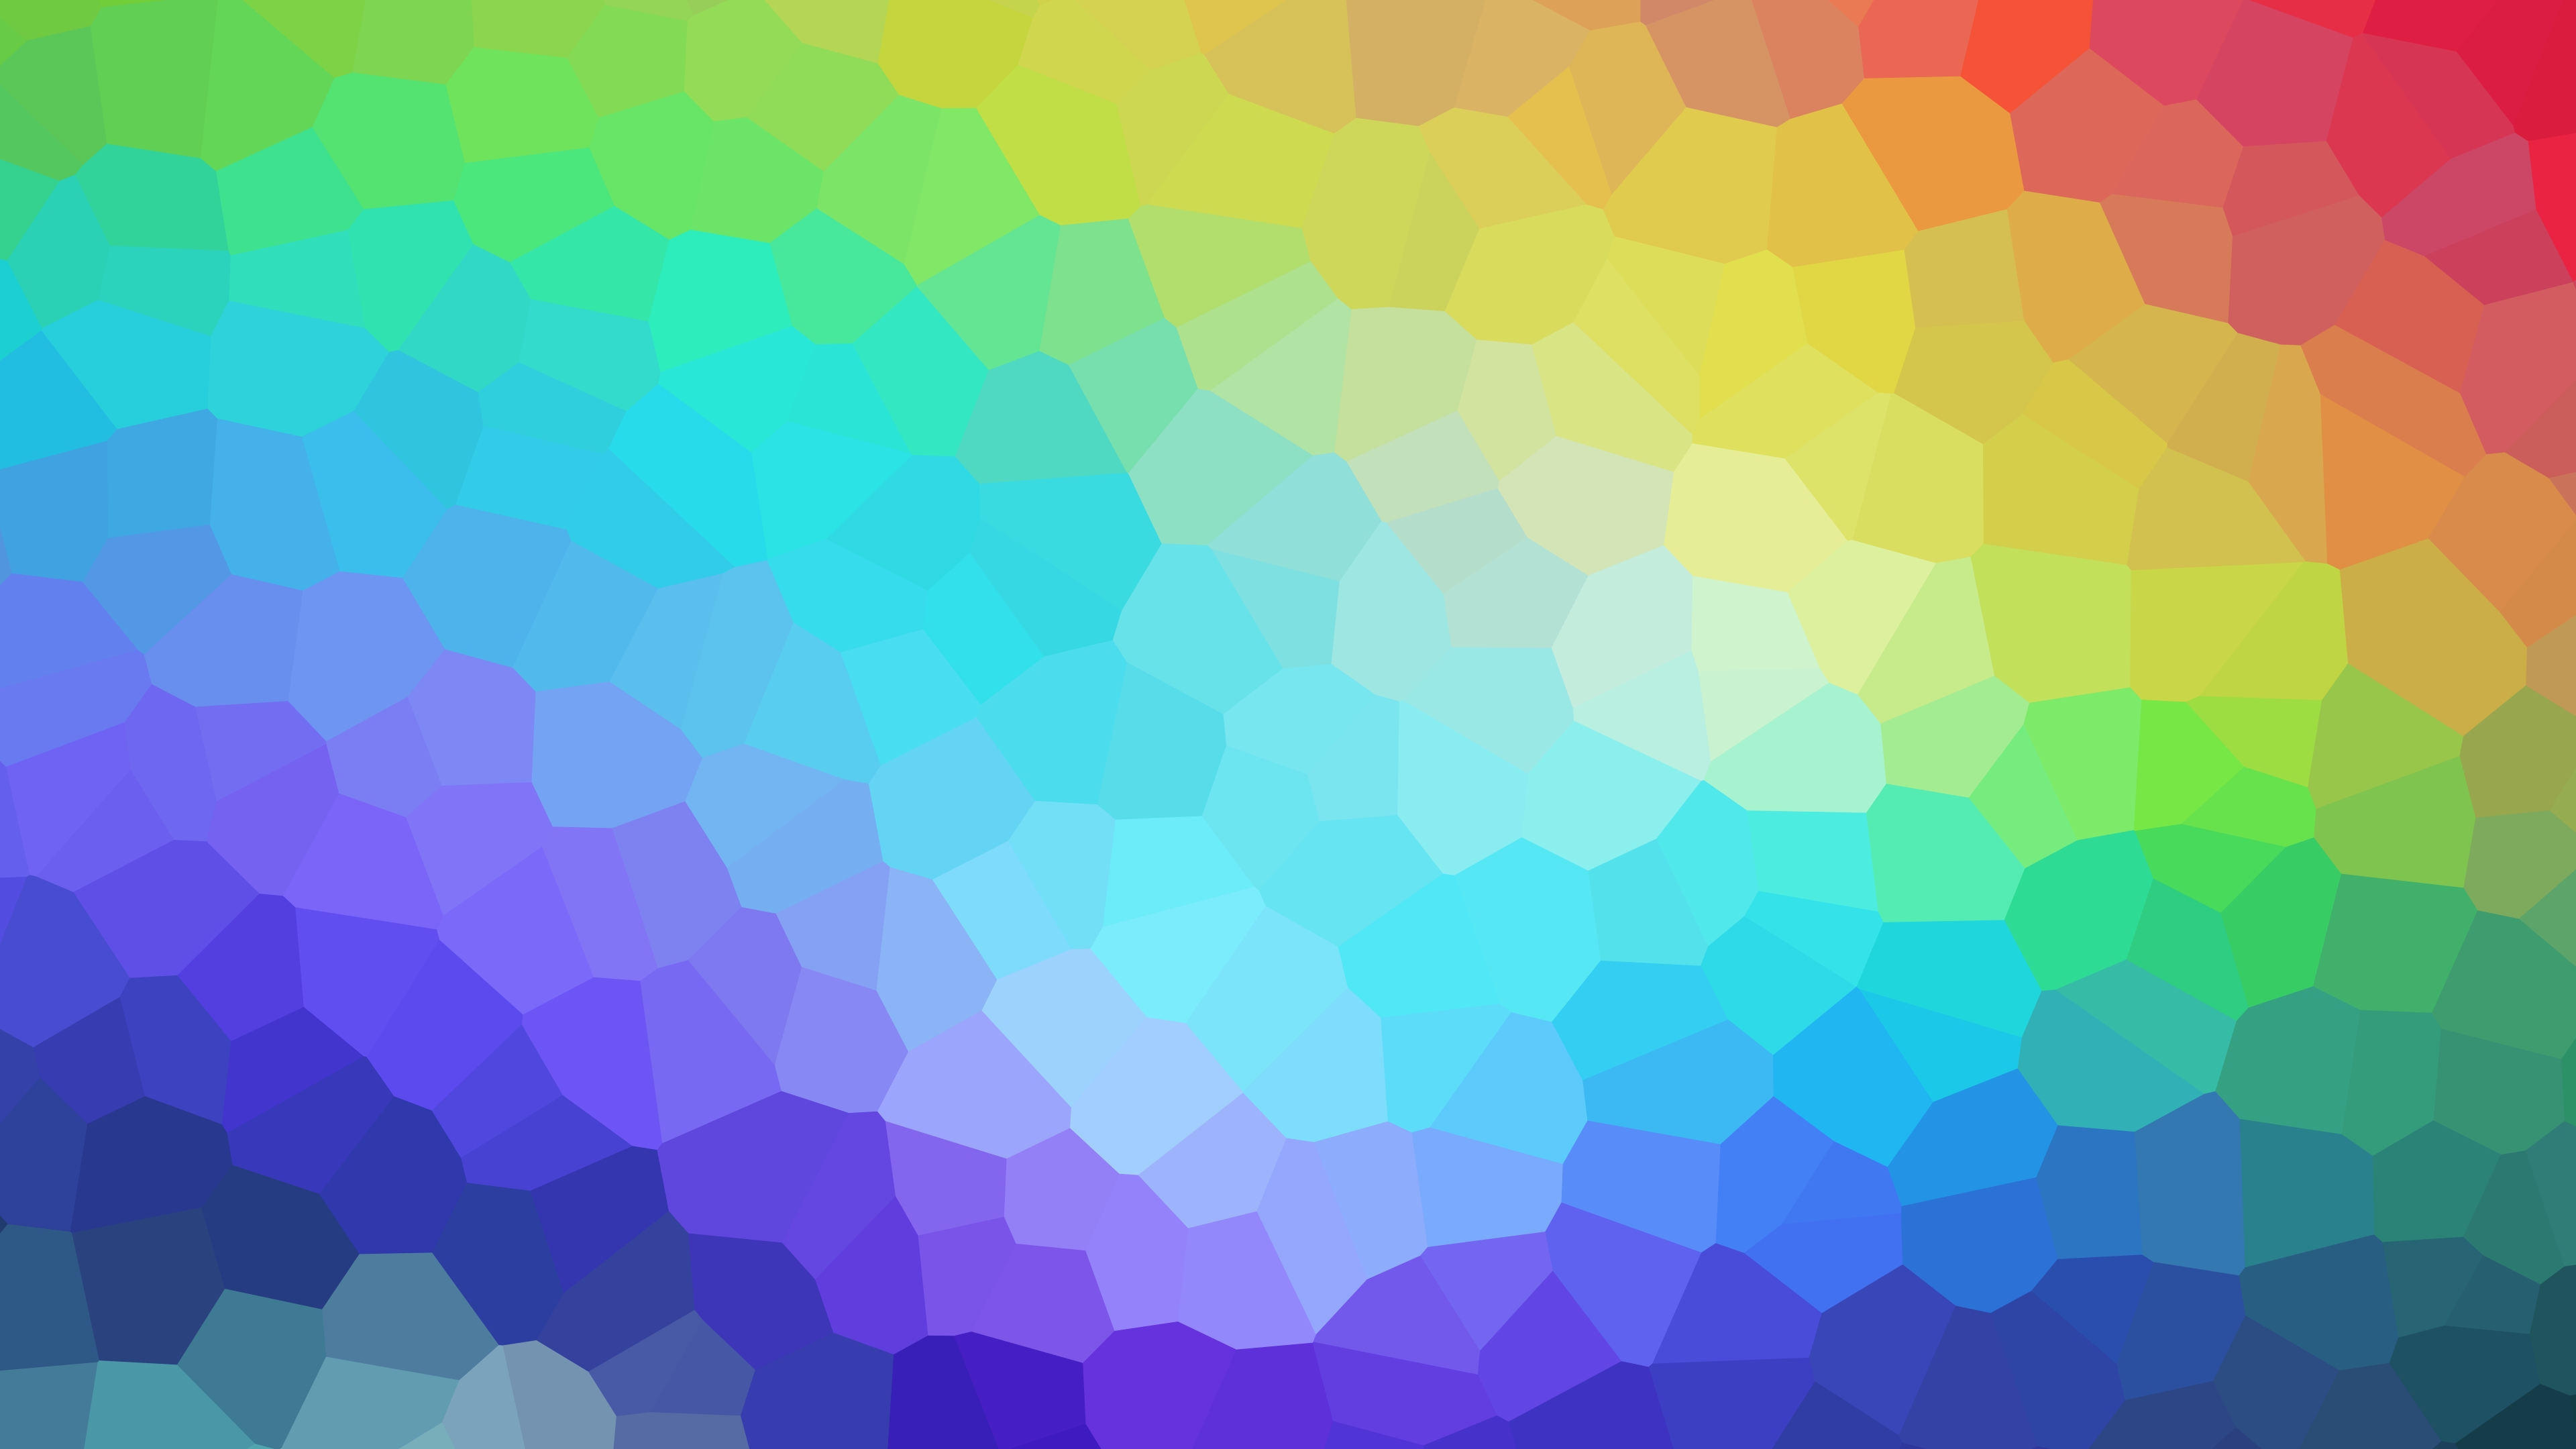 artistic colors rainbow background 4k iPad Pro Wallpapers Free Download